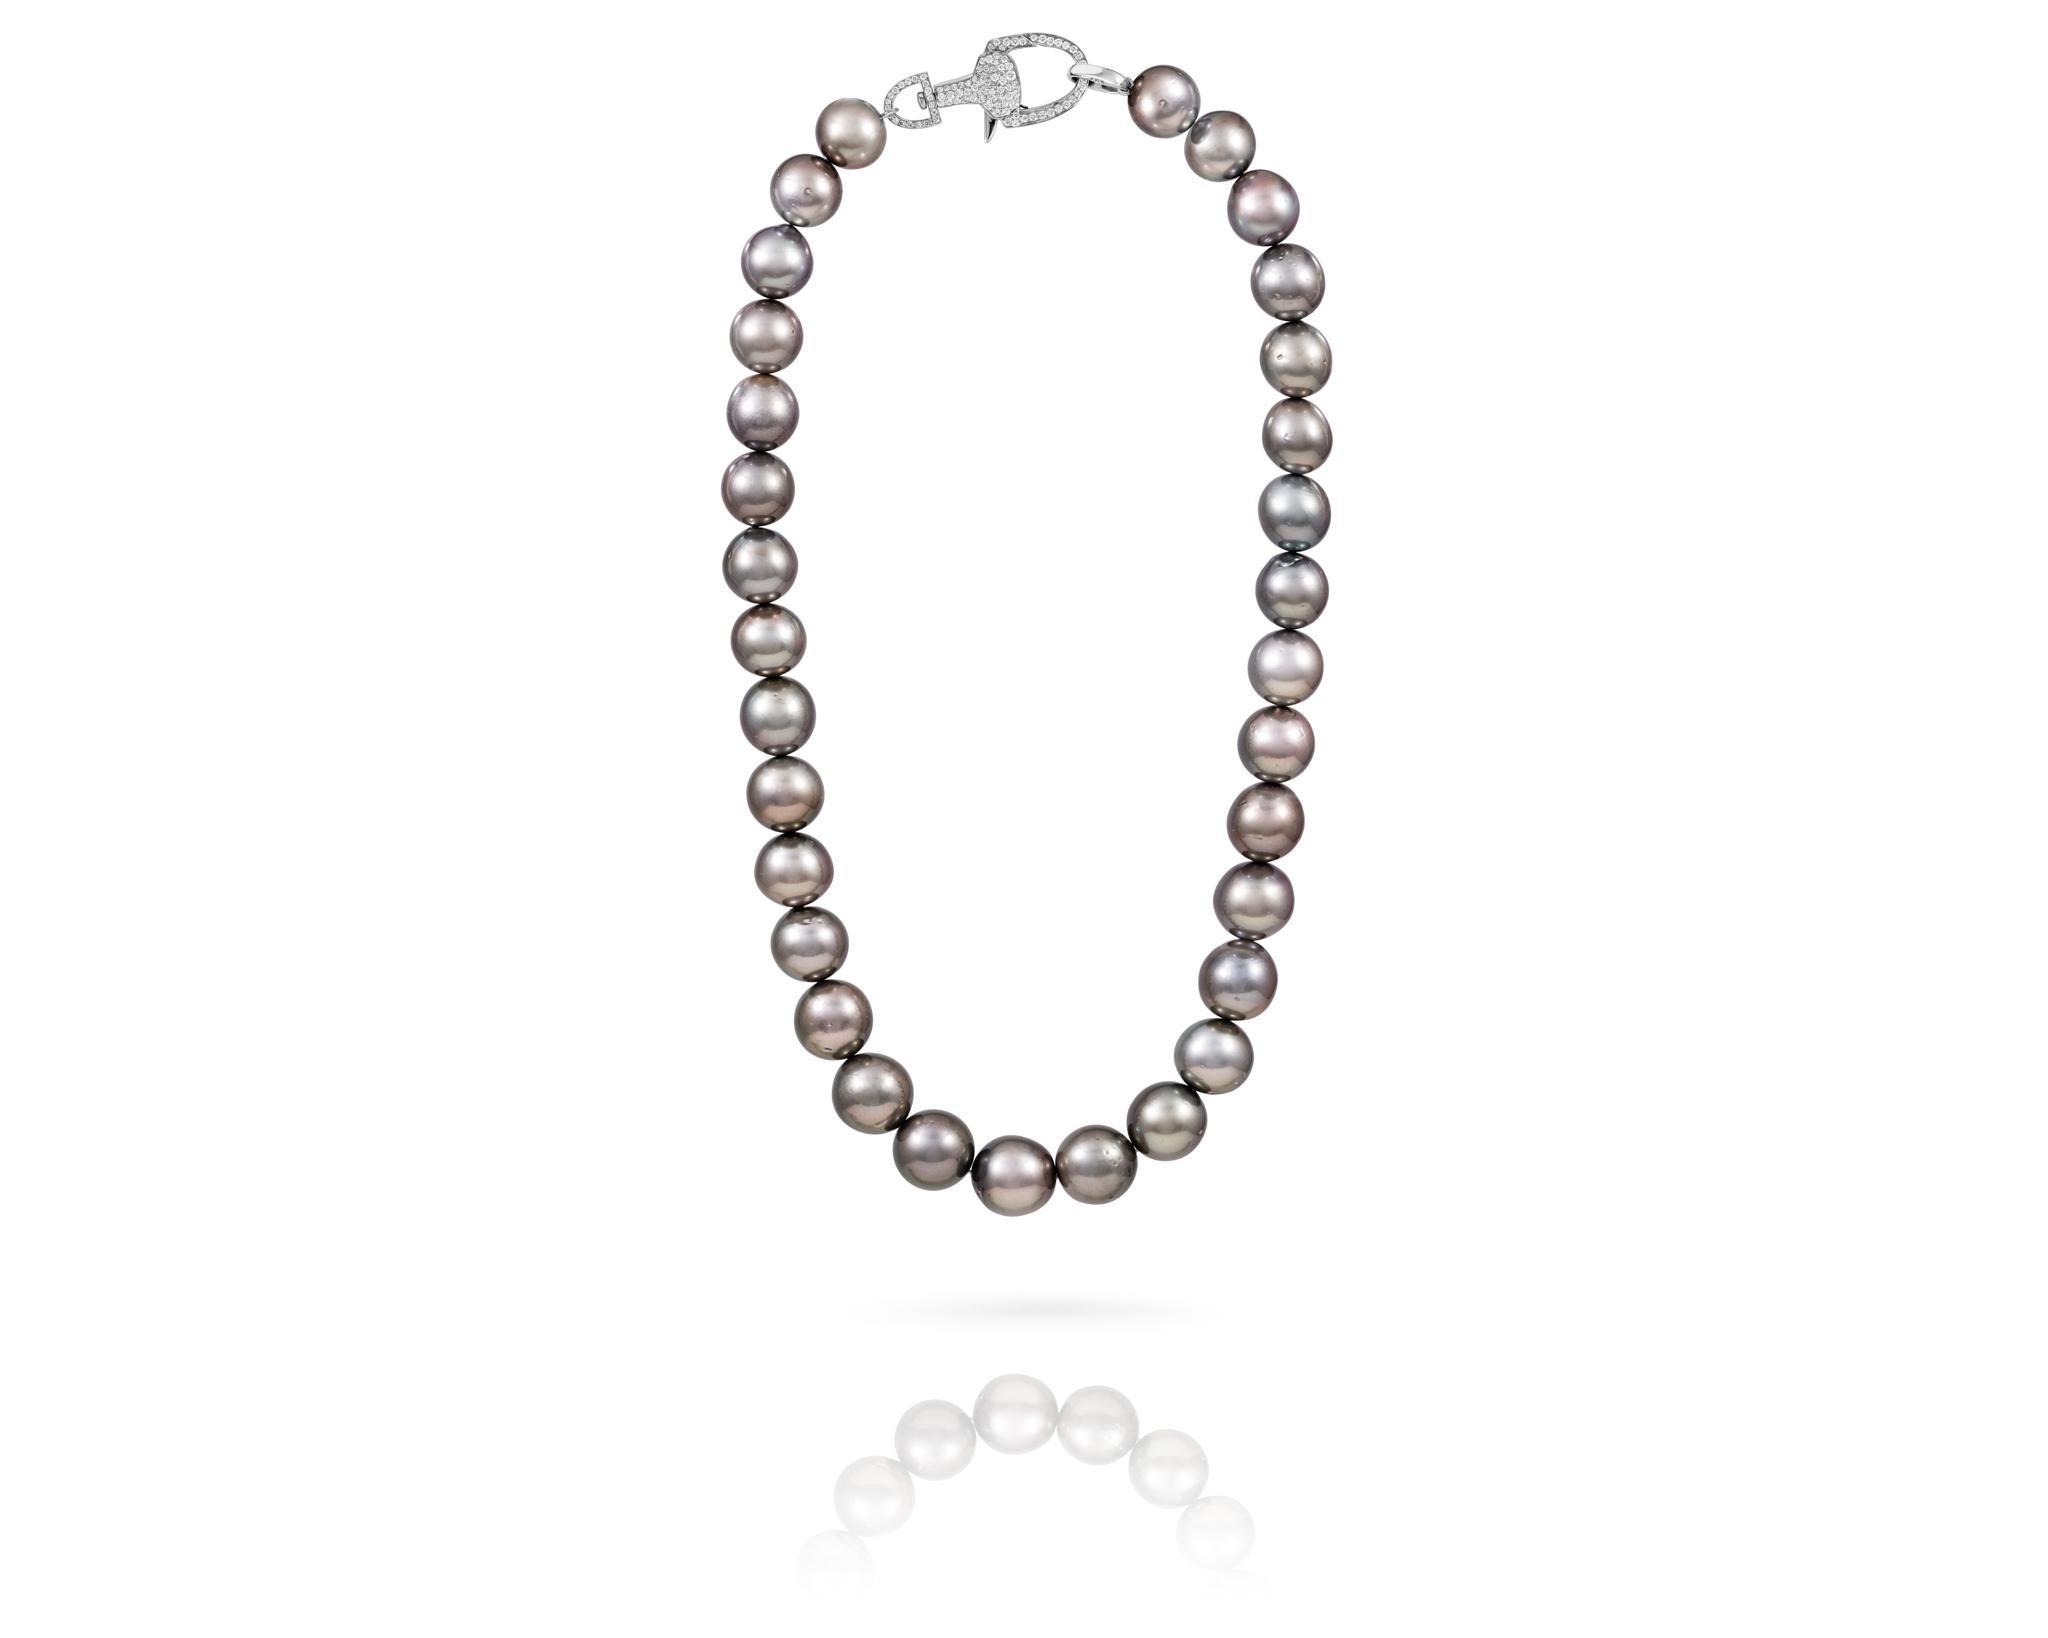 Part of the Vincent Peach Pearl Collection, the Signature Tahitian Pearl Necklace features 18